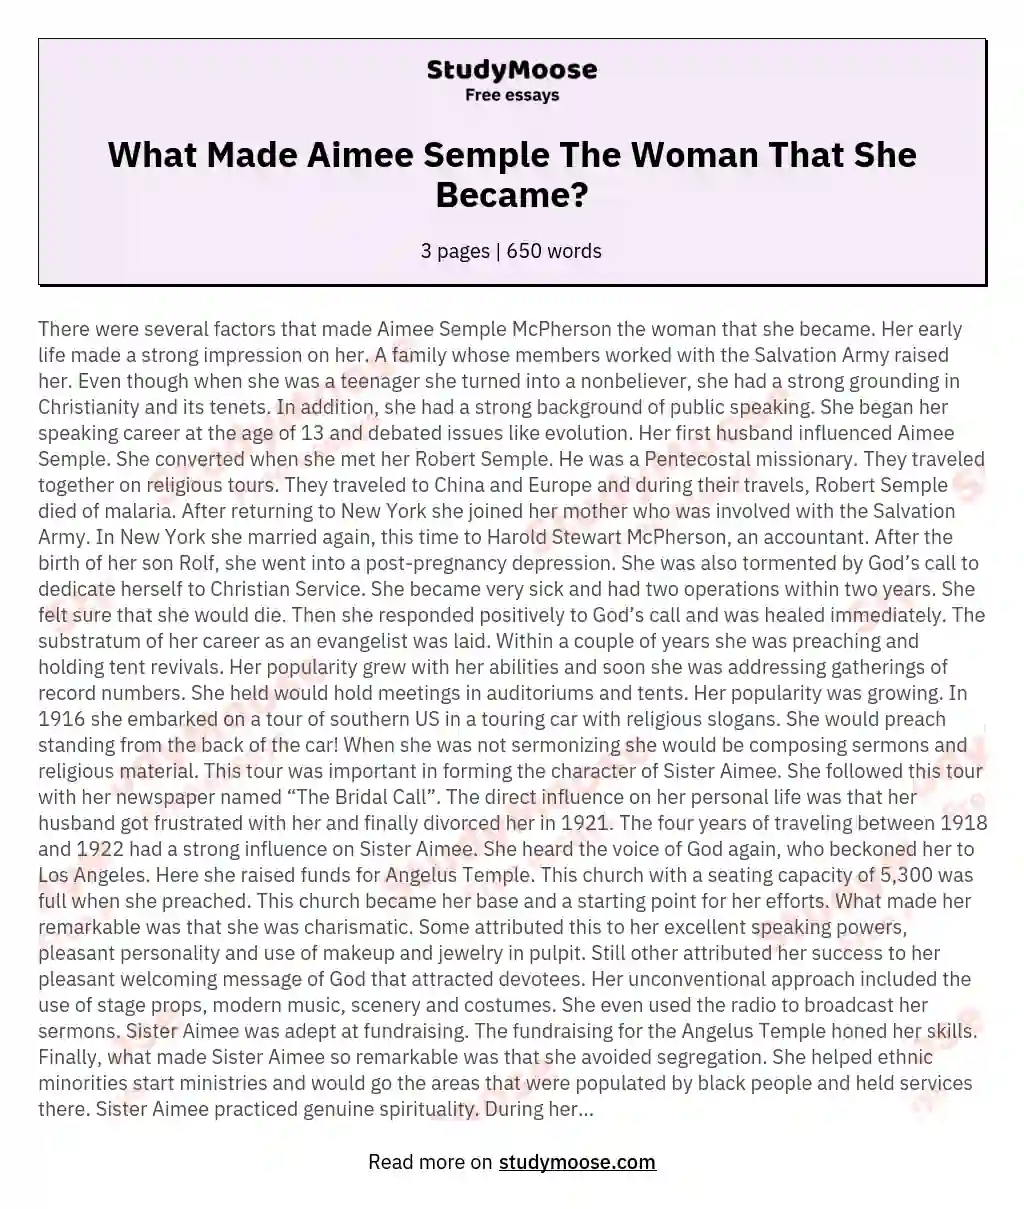 What Made Aimee Semple The Woman That She Became? essay